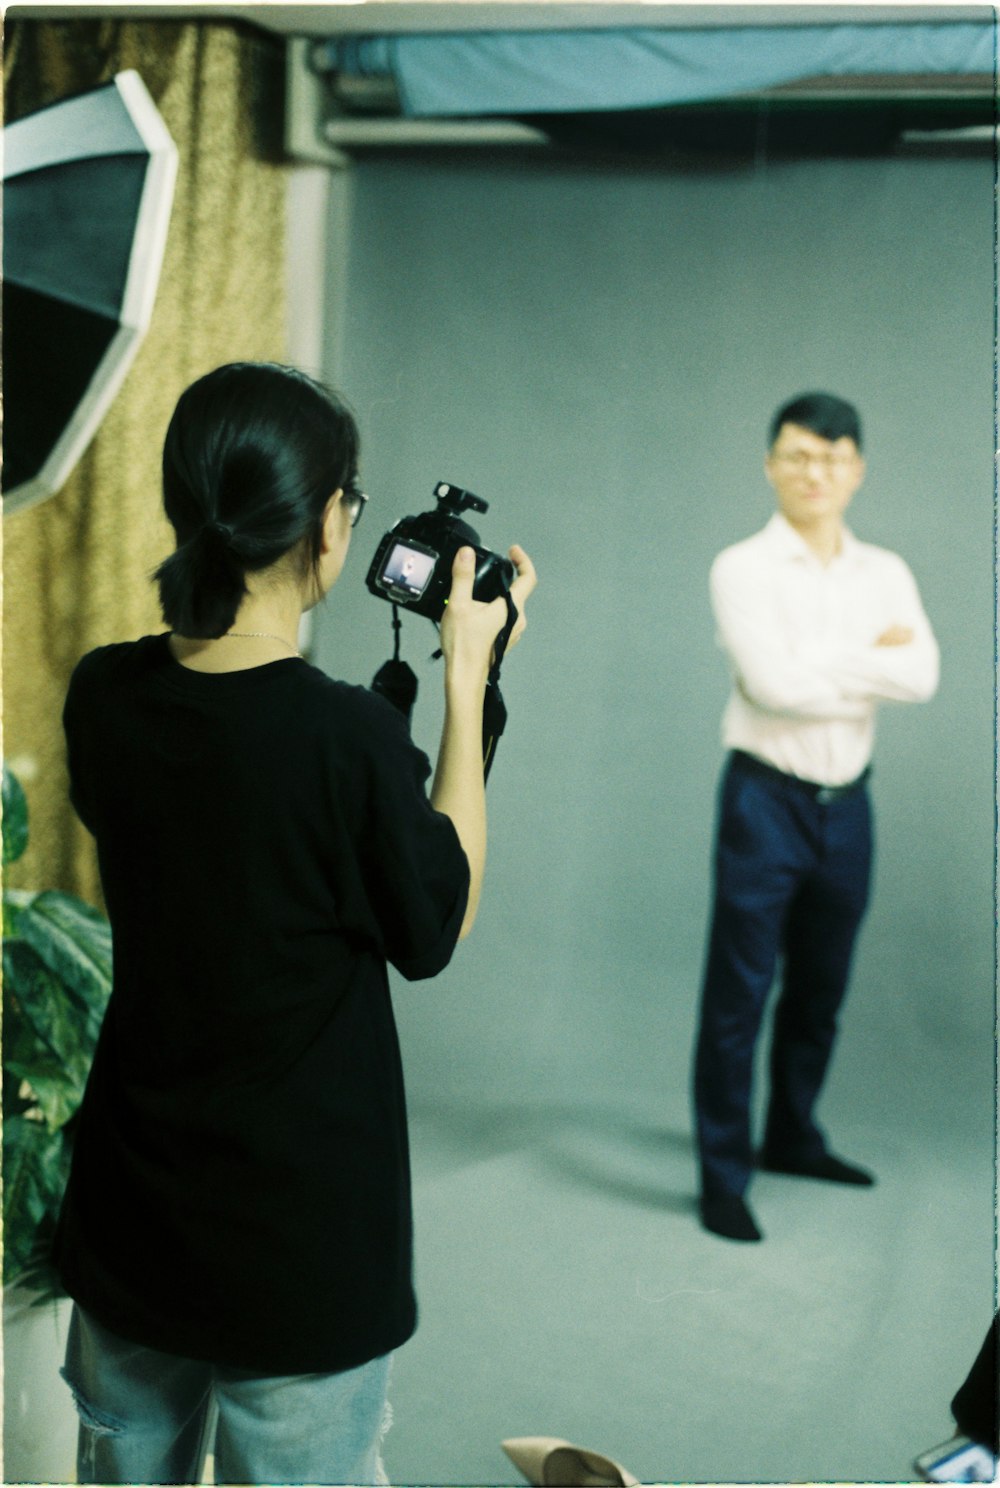 woman holding DSLR camera standing near man wearing white collared button-up long-sleeved shirt beside wall